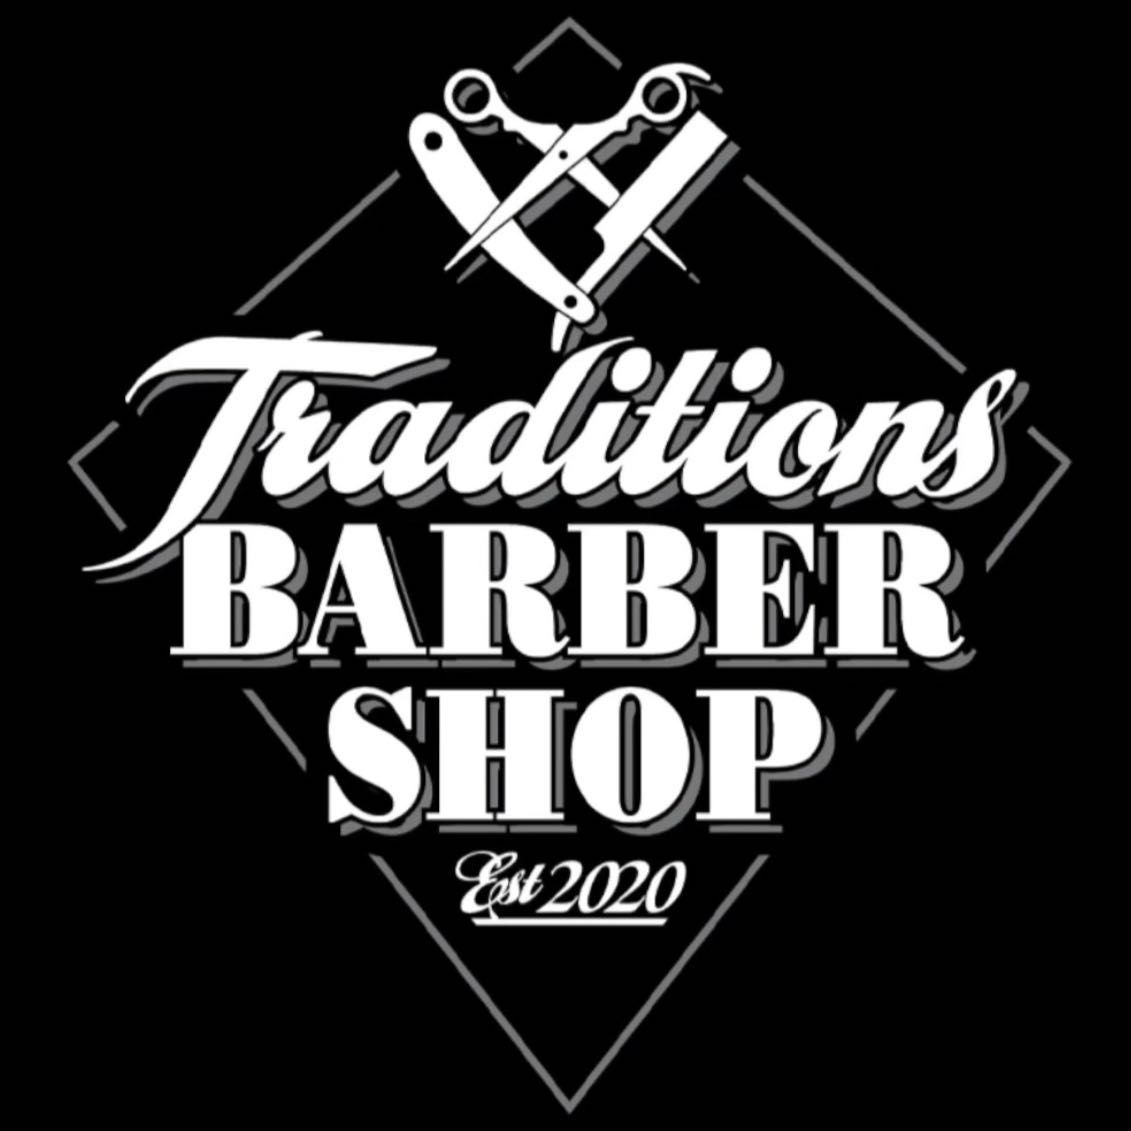 Brianna The Barber, 1532 Lakewood ave, Suite 4, Modesto, 95355